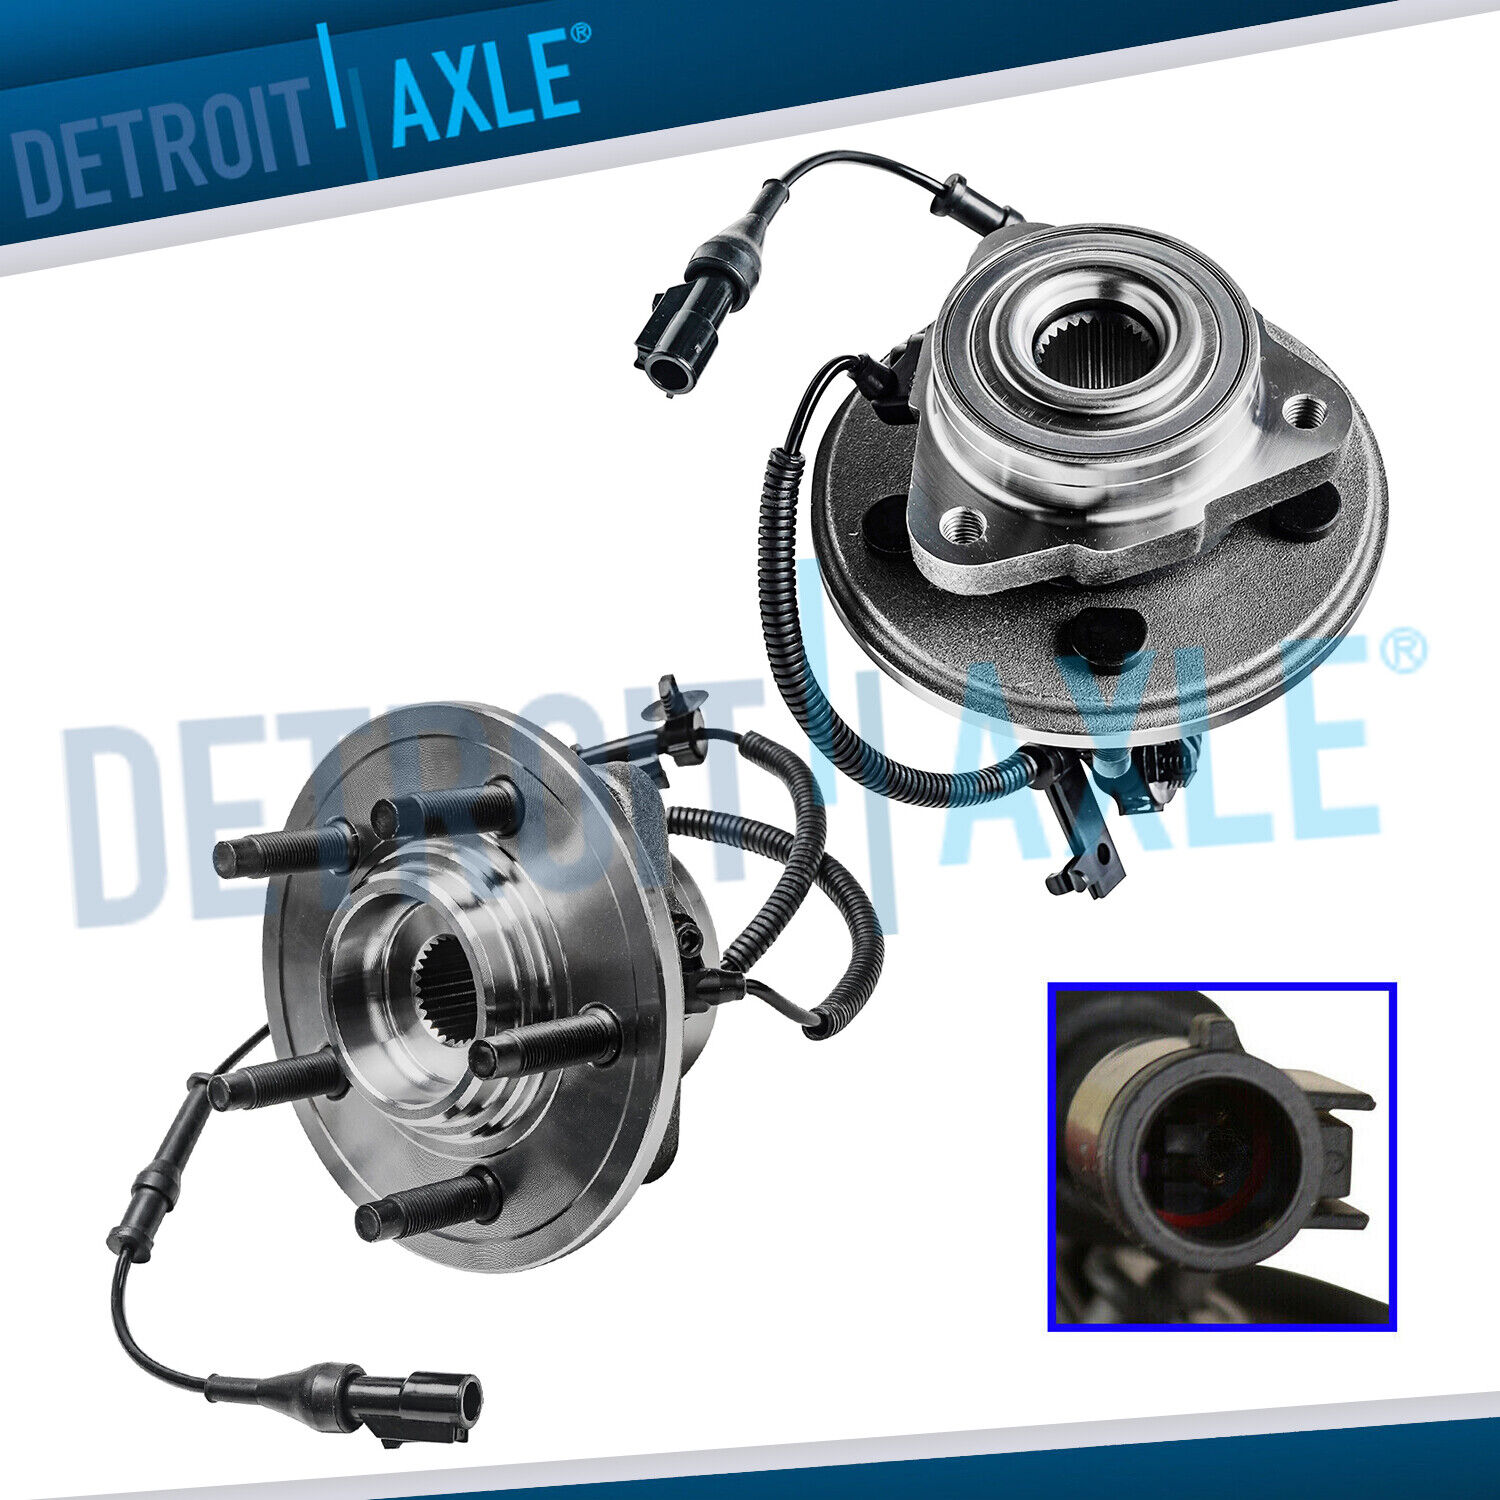 Pair (2) Front Wheel Hub and Bearing for 2006 2007-10 Ford Explorer Mountaineer